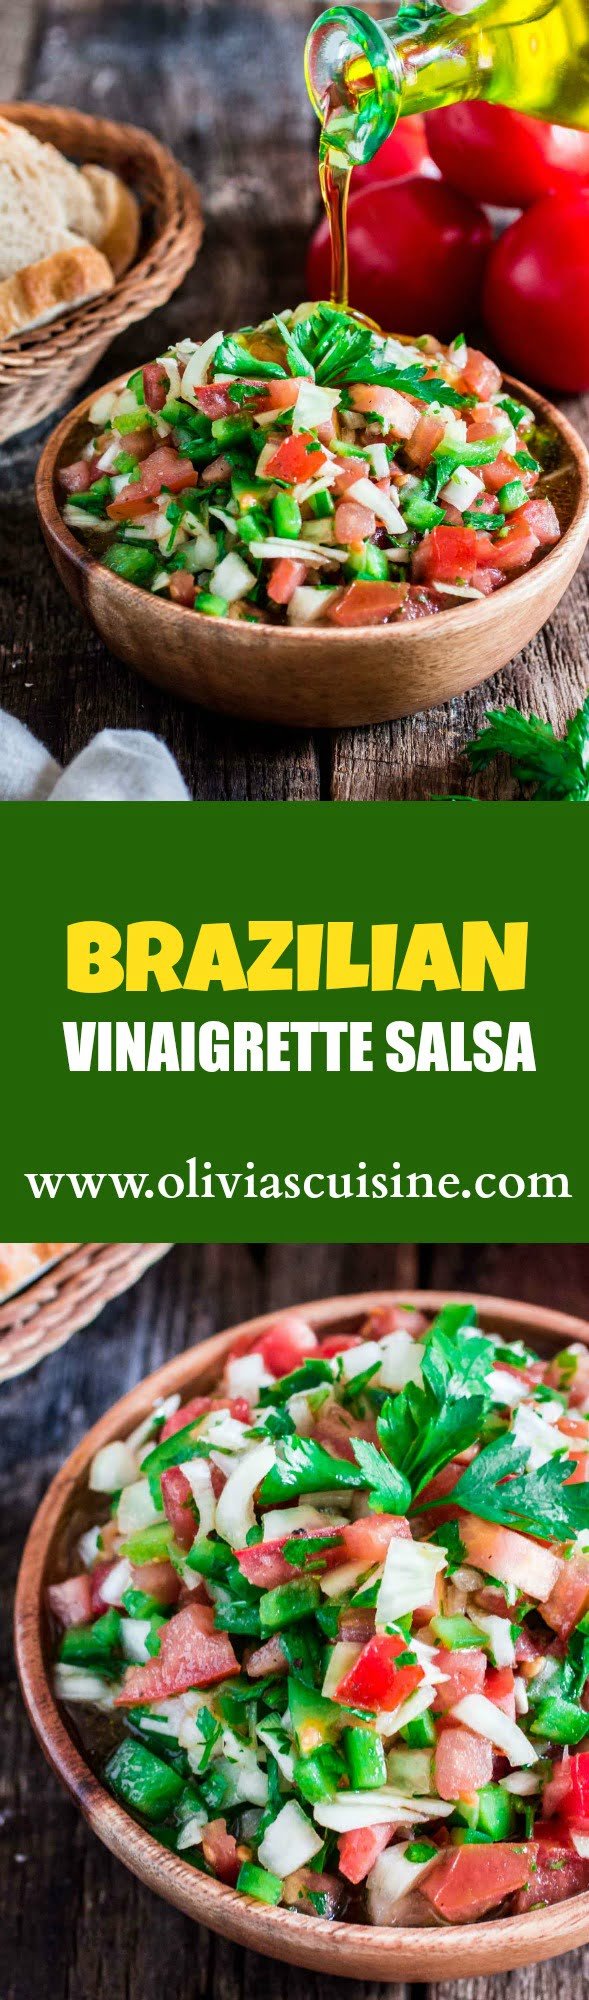 Brazilian Vinaigrette Salsa | www.oliviascuisine.com | If you've been to a Brazilian barbecue, or feijoada restaurant, you know that the "vinagrete" is a must! Milder than the Mexican version, we make our salsa with tomatoes, onions, bell peppers (depending on the region), Vinager and oilve oil. It goest great with any grilled meat, chicken, fish or just with some crunchy bread!